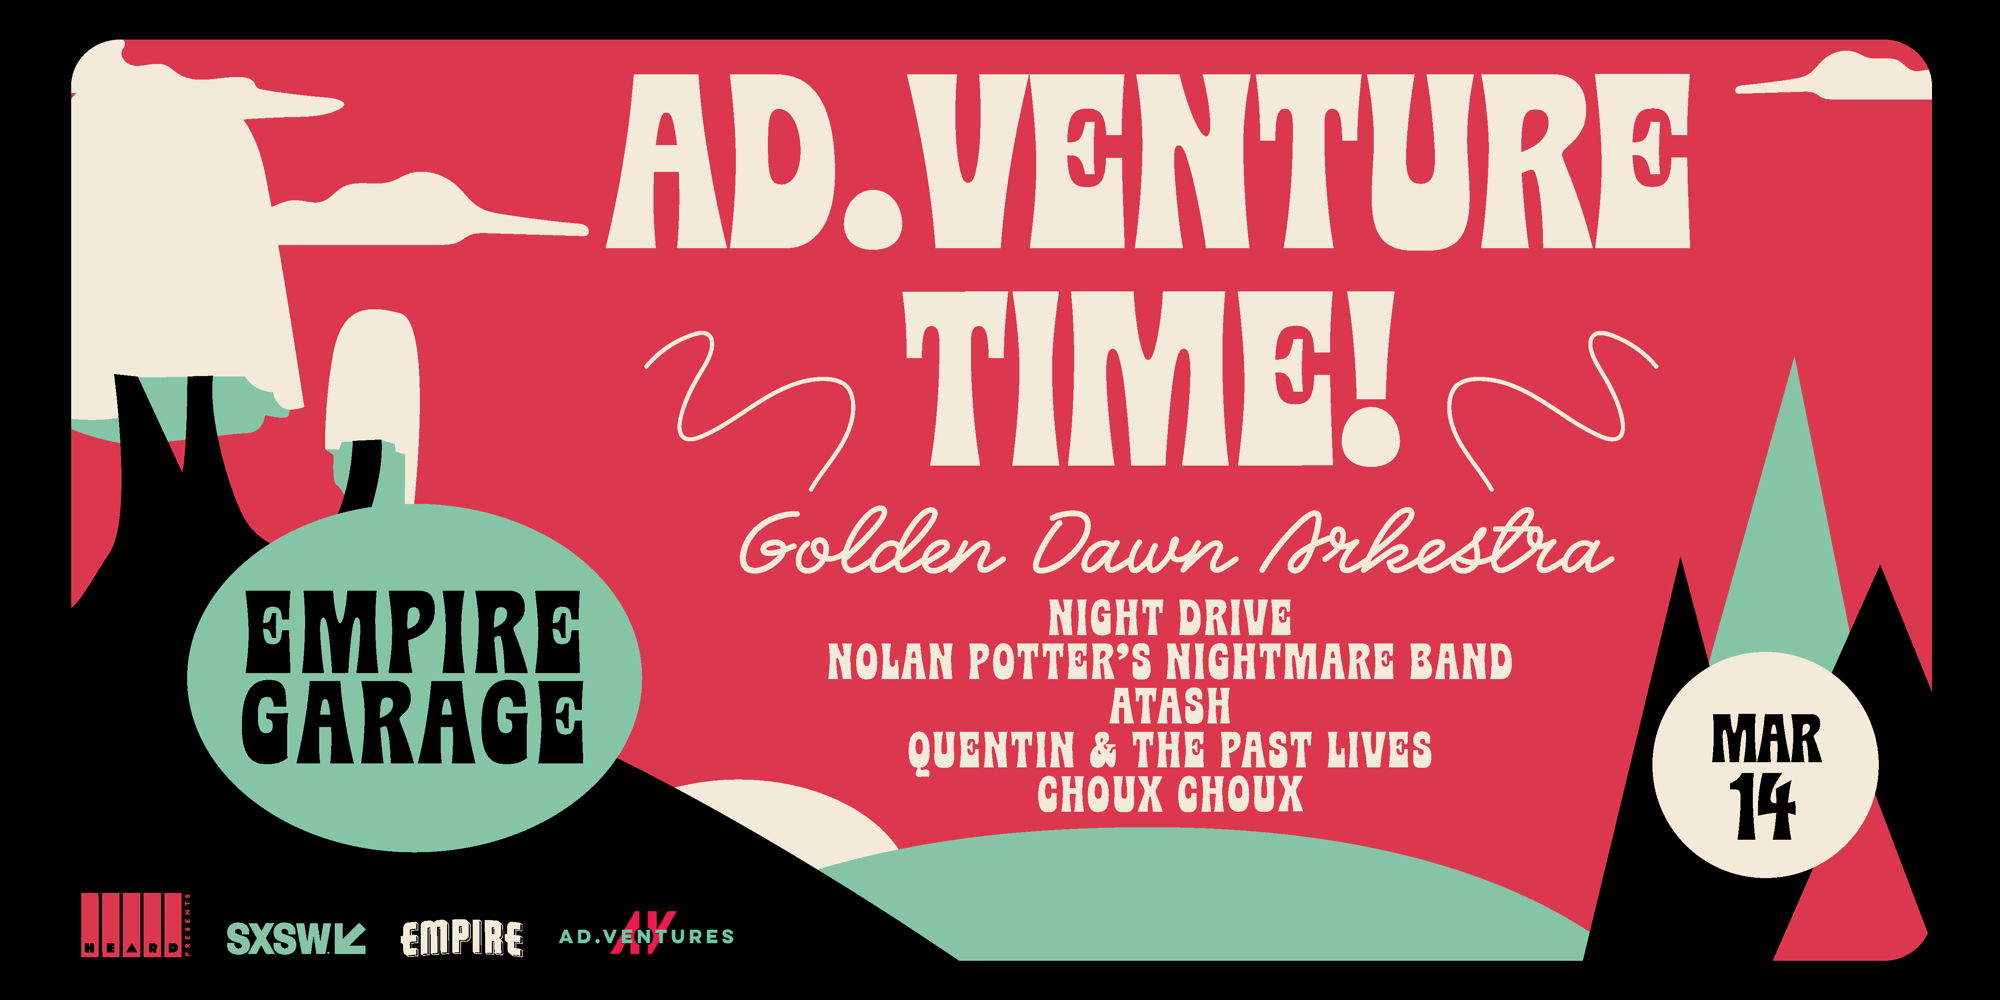 SXSW Official: Ad.Venture Time! w/ Golden Dawn Arkestra, Night Drive, Nolan Potter's Nightmare Band, Atash, and Quentin & The Past Lives, Choux Choux at Empire Garage 3/14 promotional image